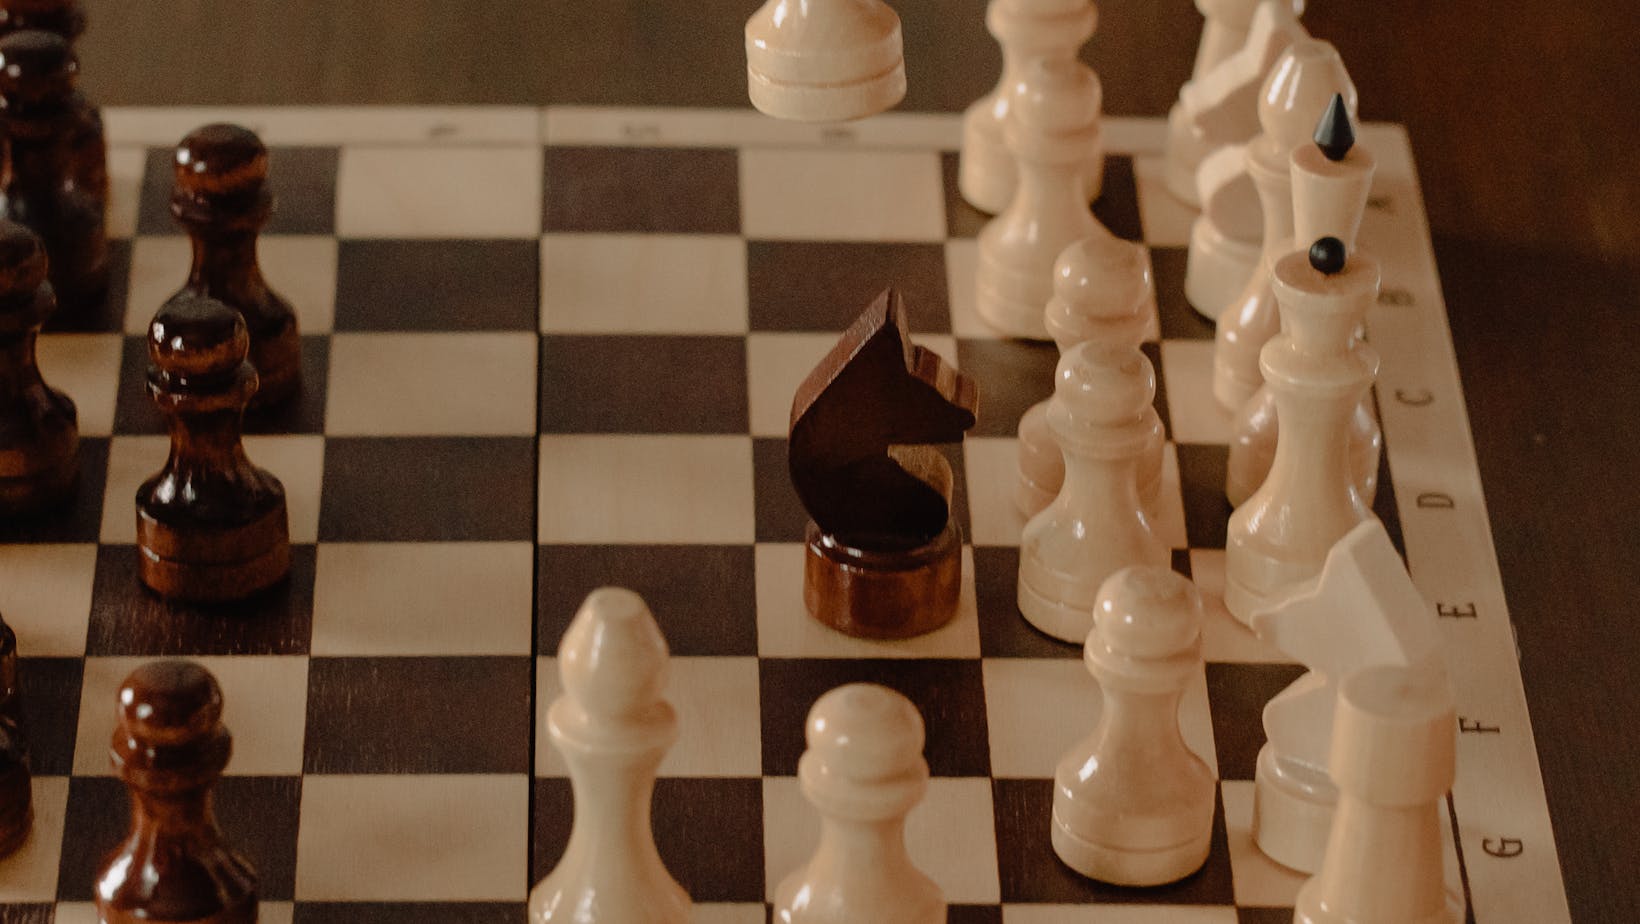 does playing chess help you improve your strategic thinking